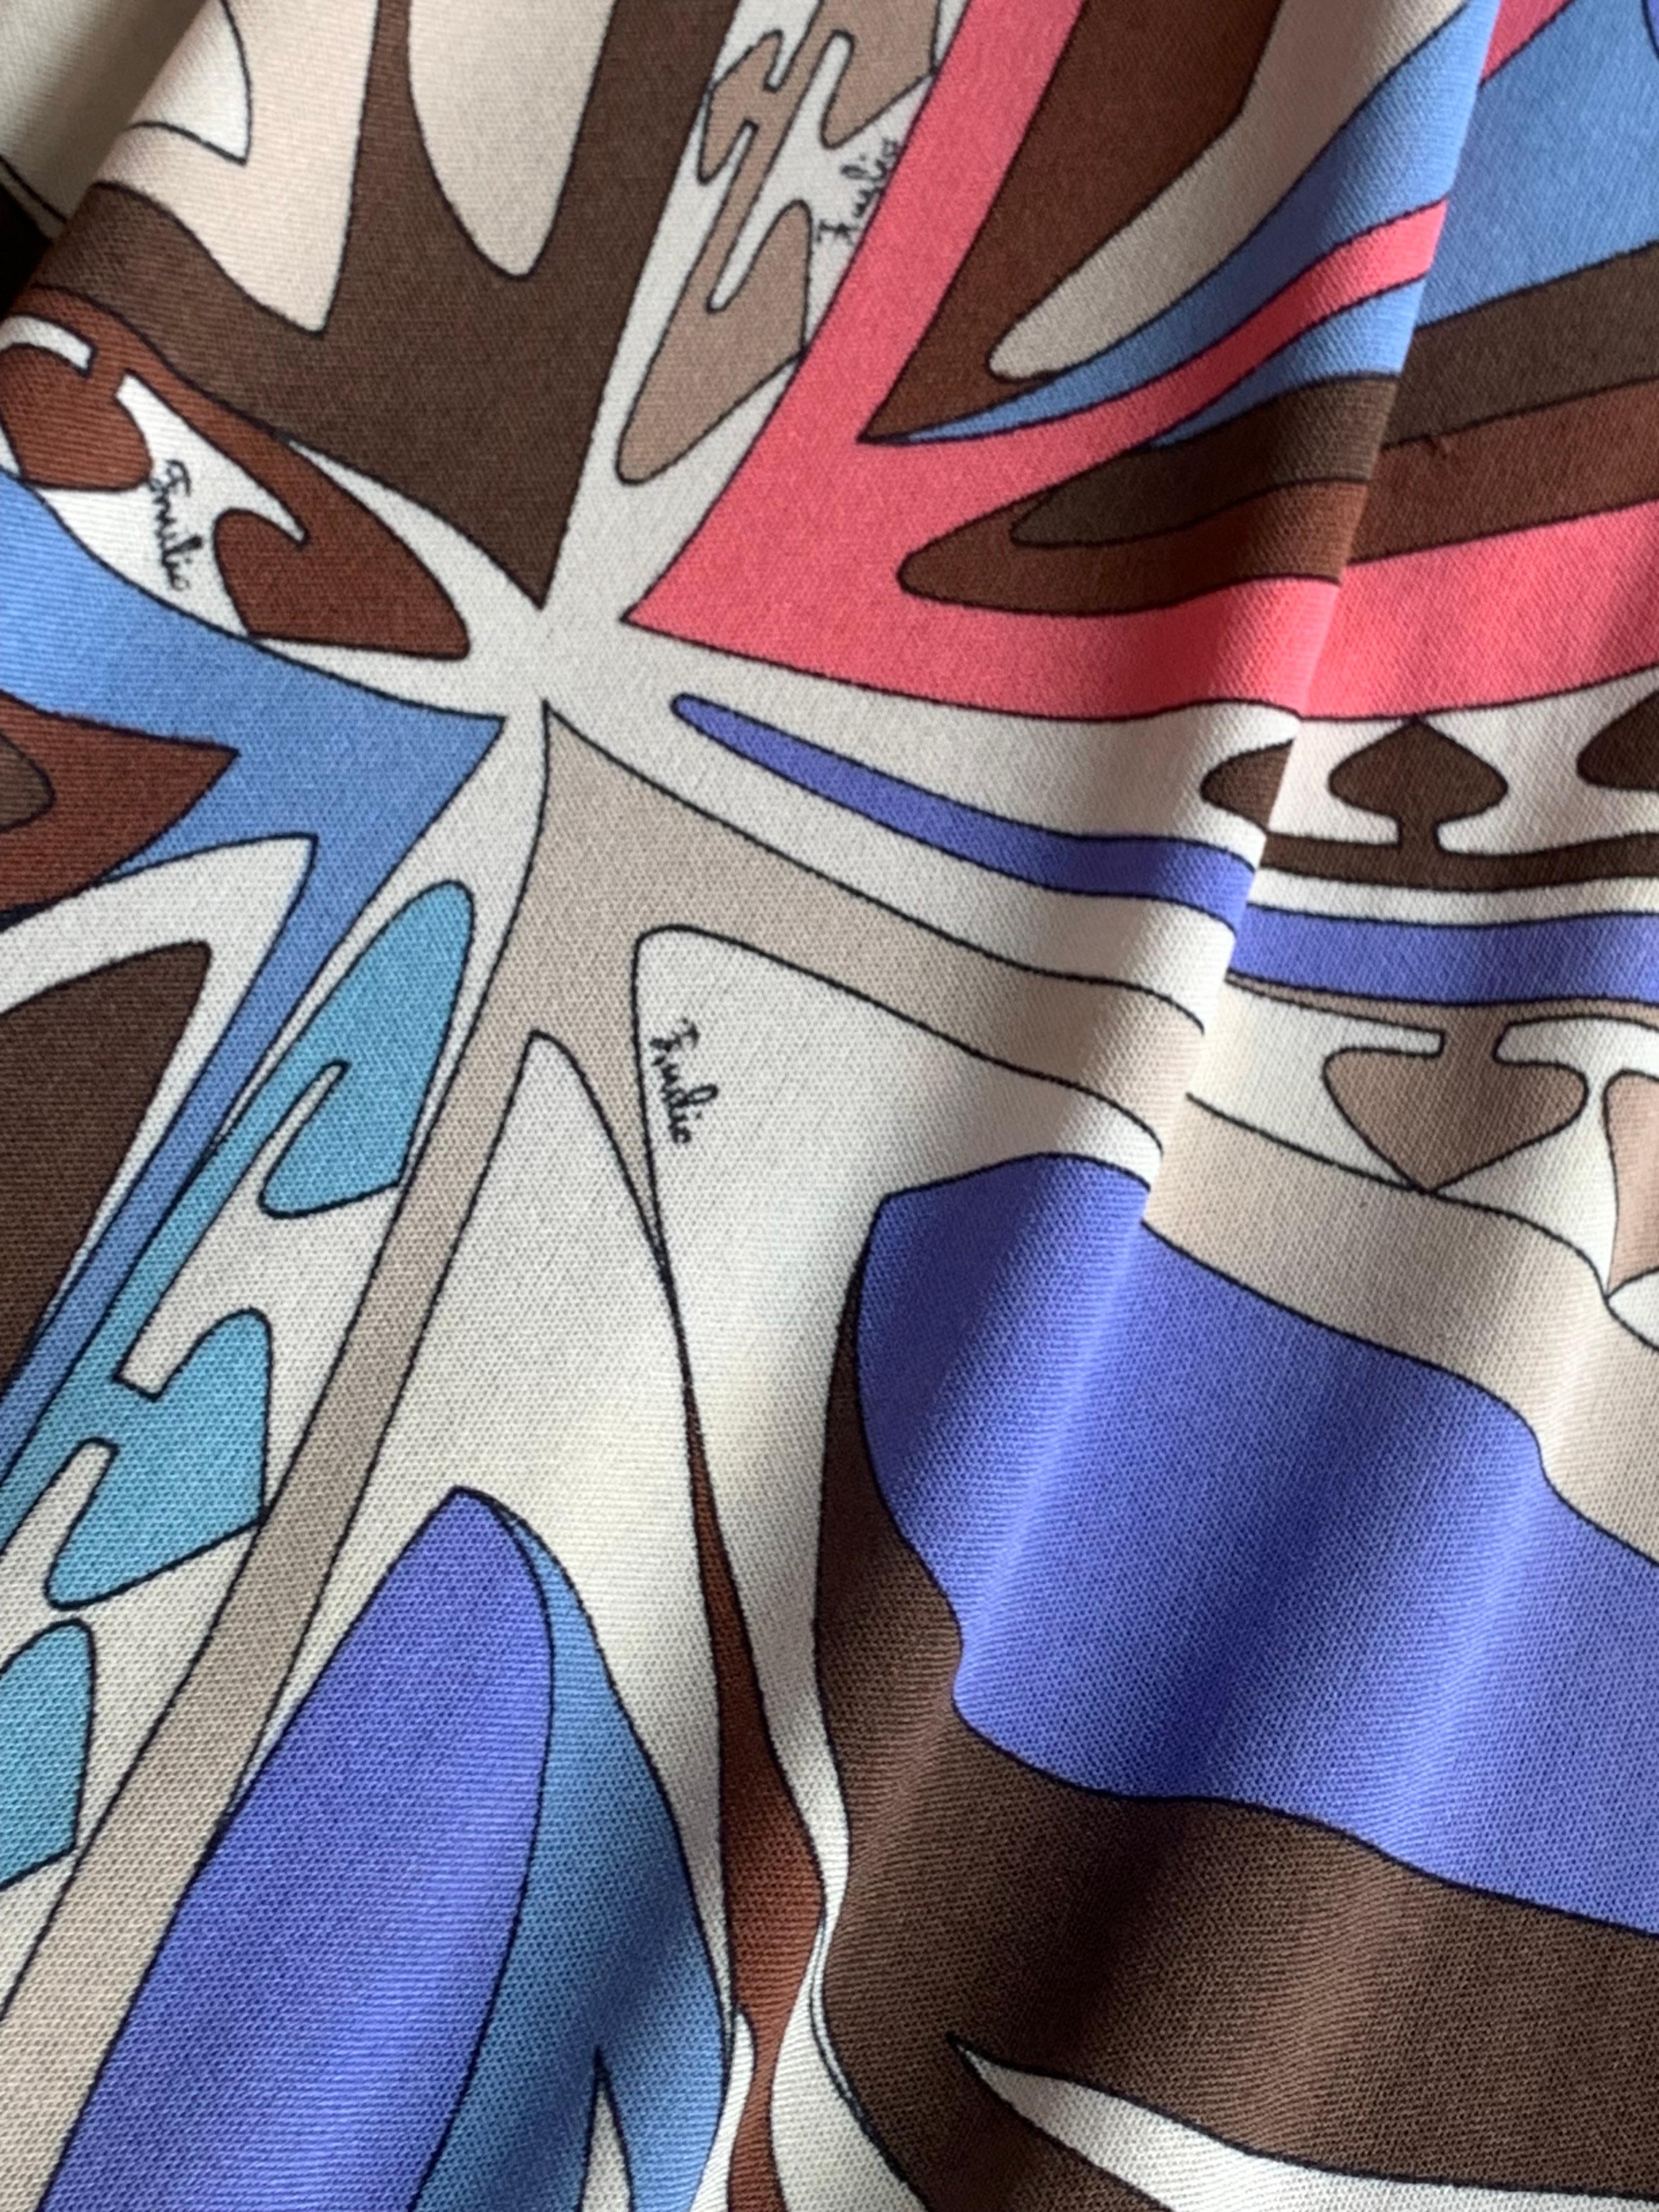 1960s Emilio Pucci Psychedelic Print Maxi Dress / Periwinkle, Pink, Brown Jersey For Sale 10